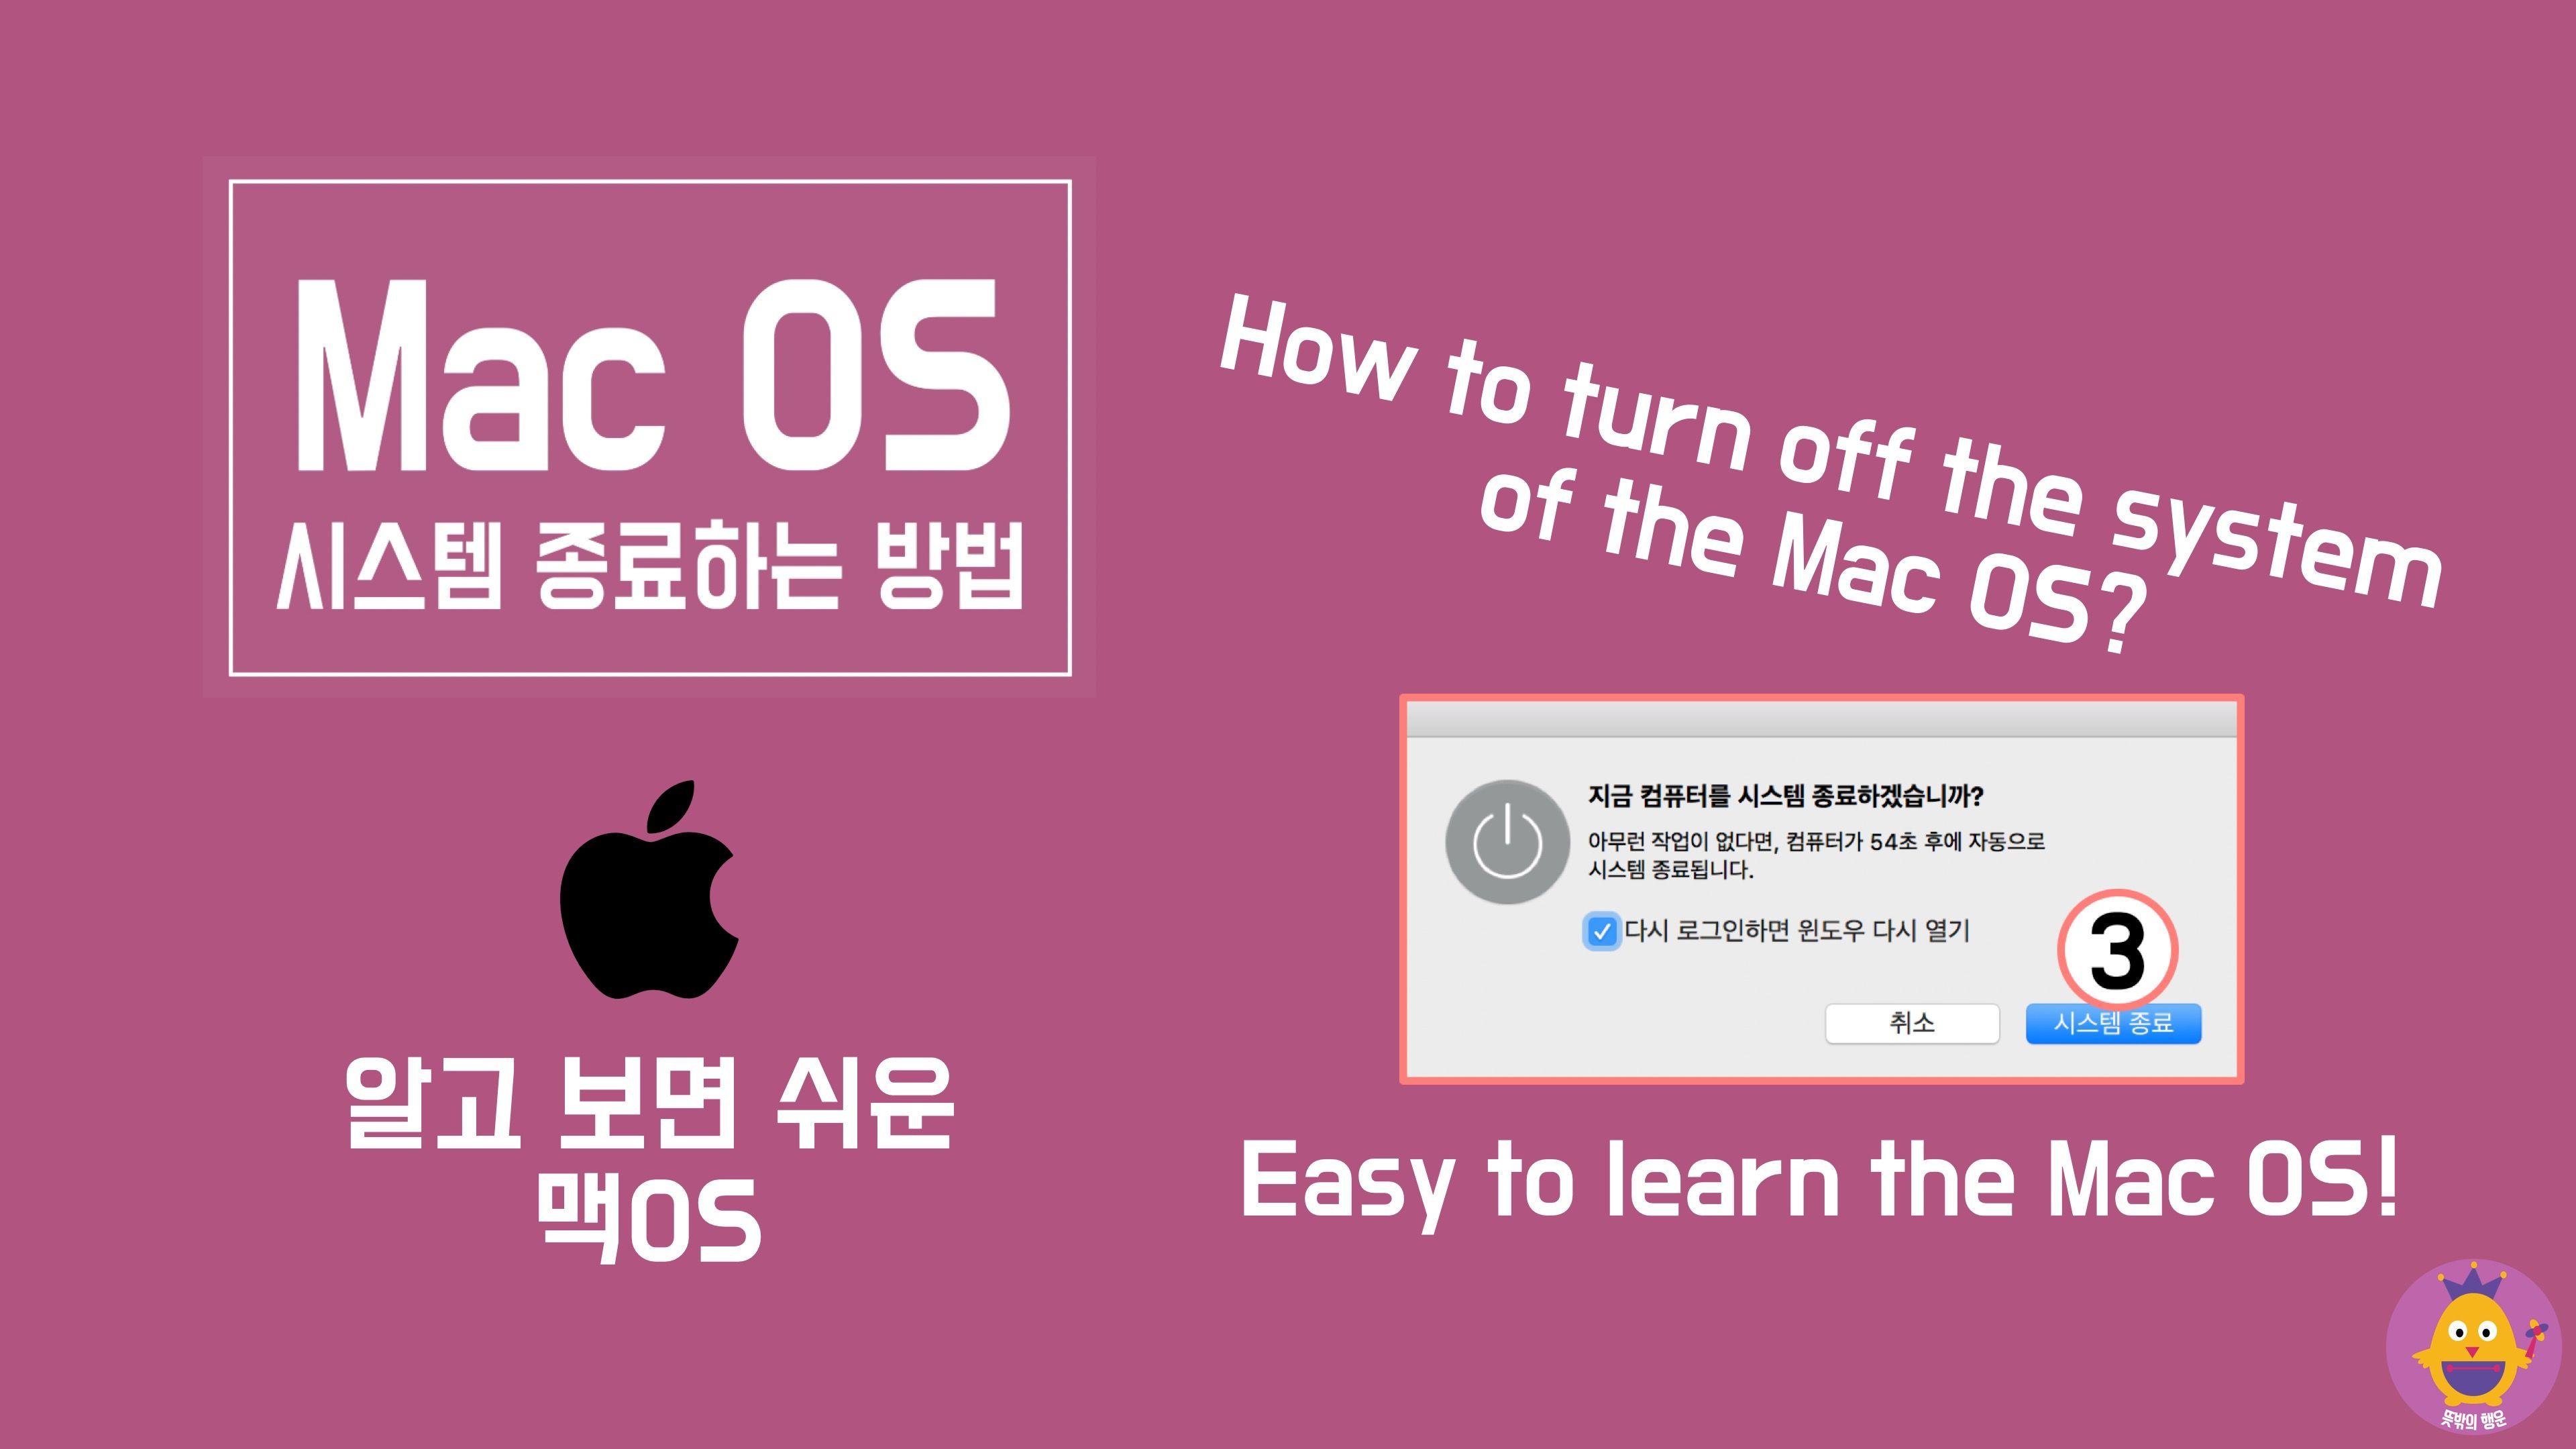 Happy Mac OS Logo - happy MacOS #1 how to turn off the Mac OS system — Steemit